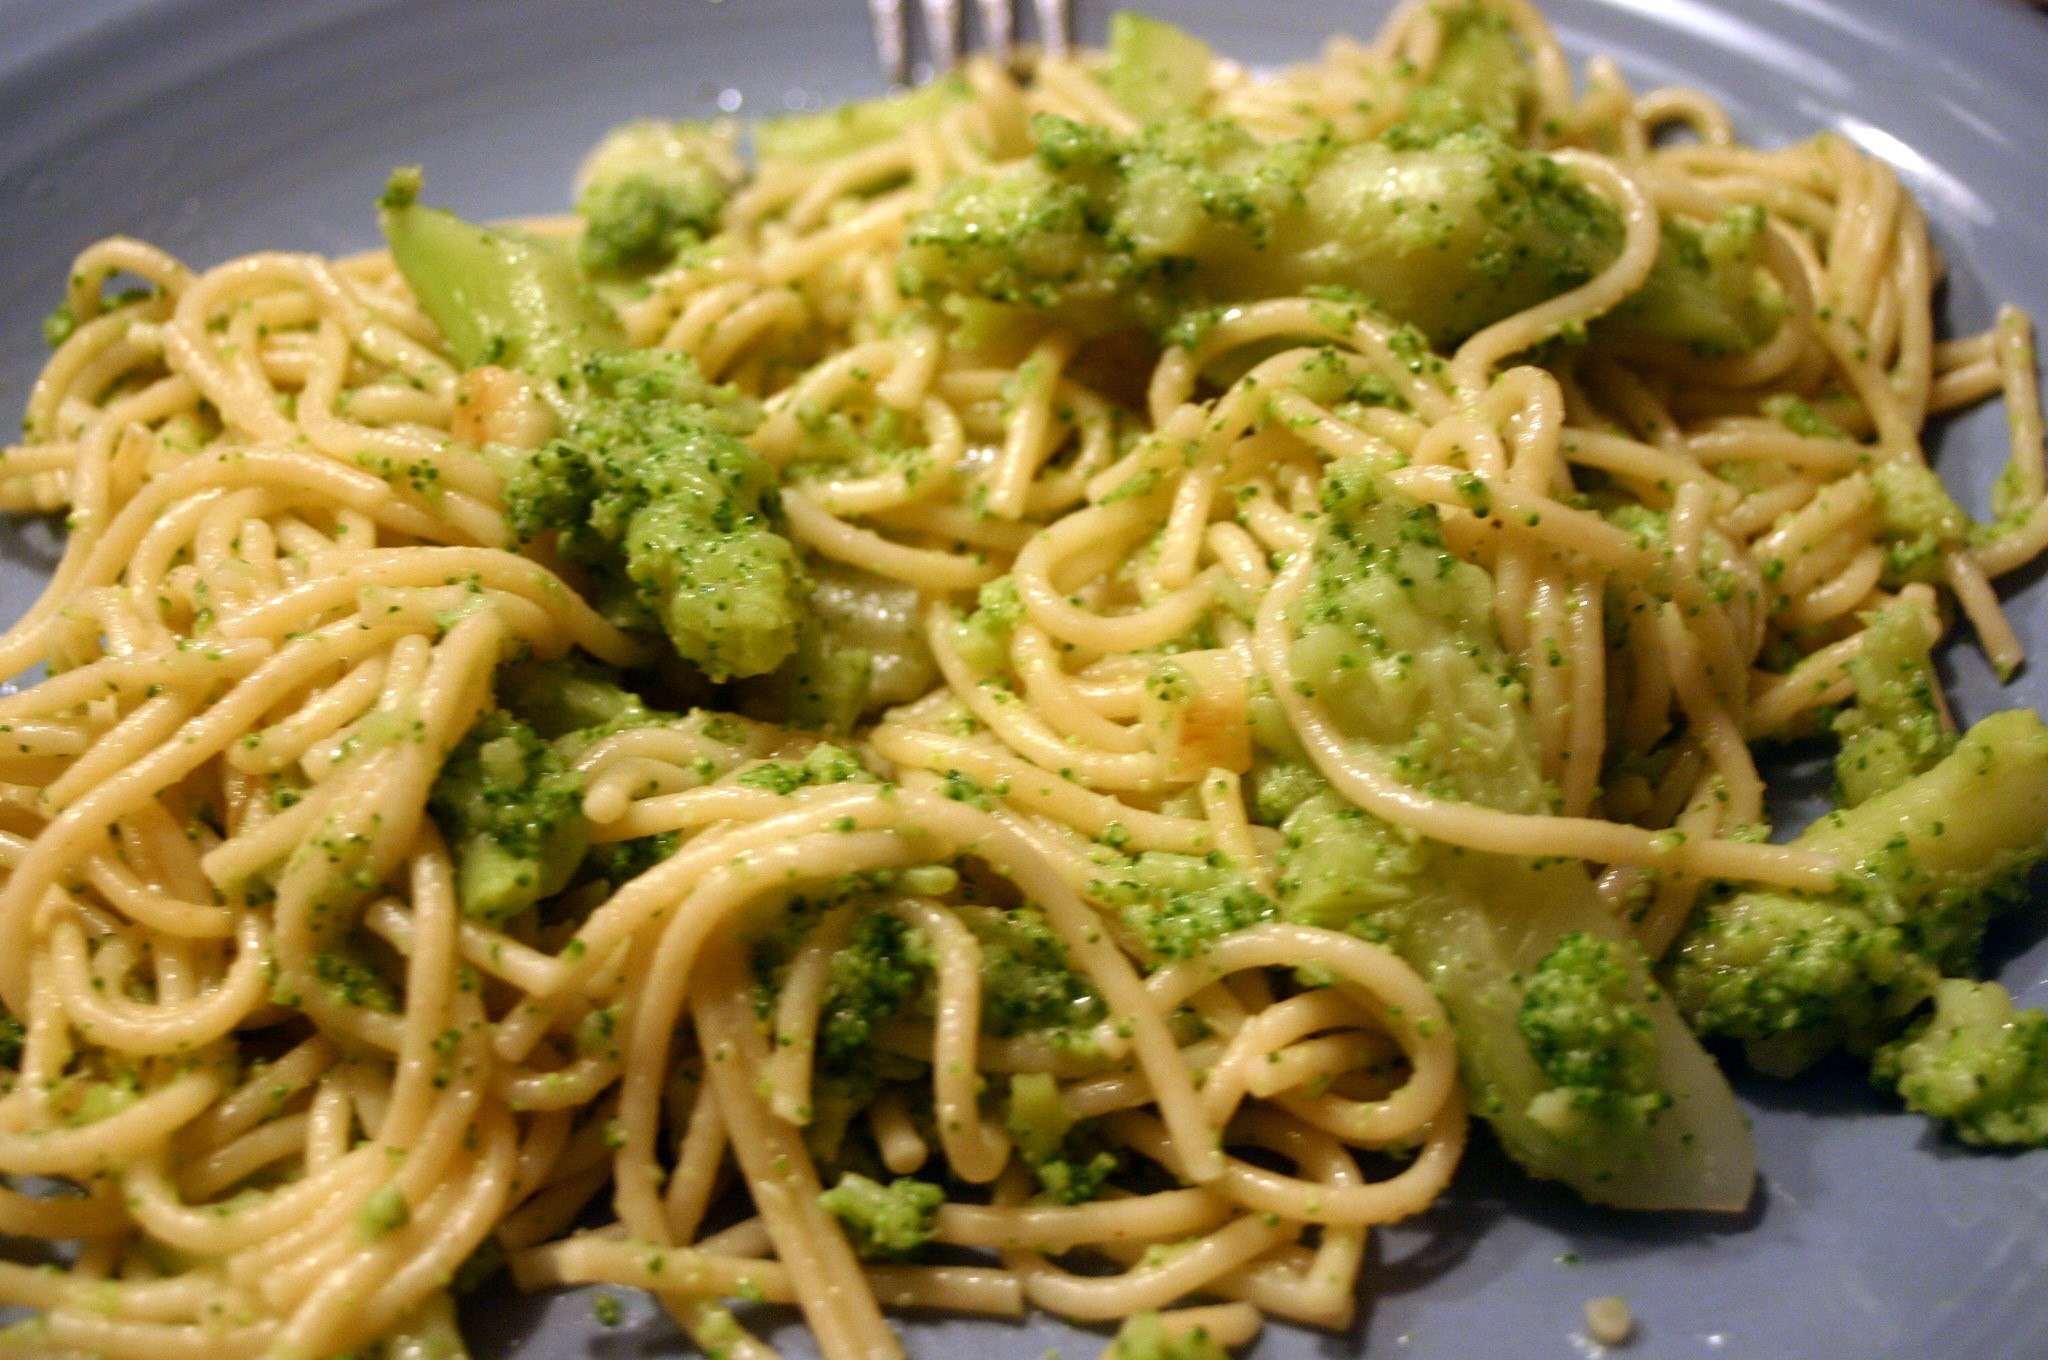 Pasta with broccoli arriminati | Visit Sicily official page